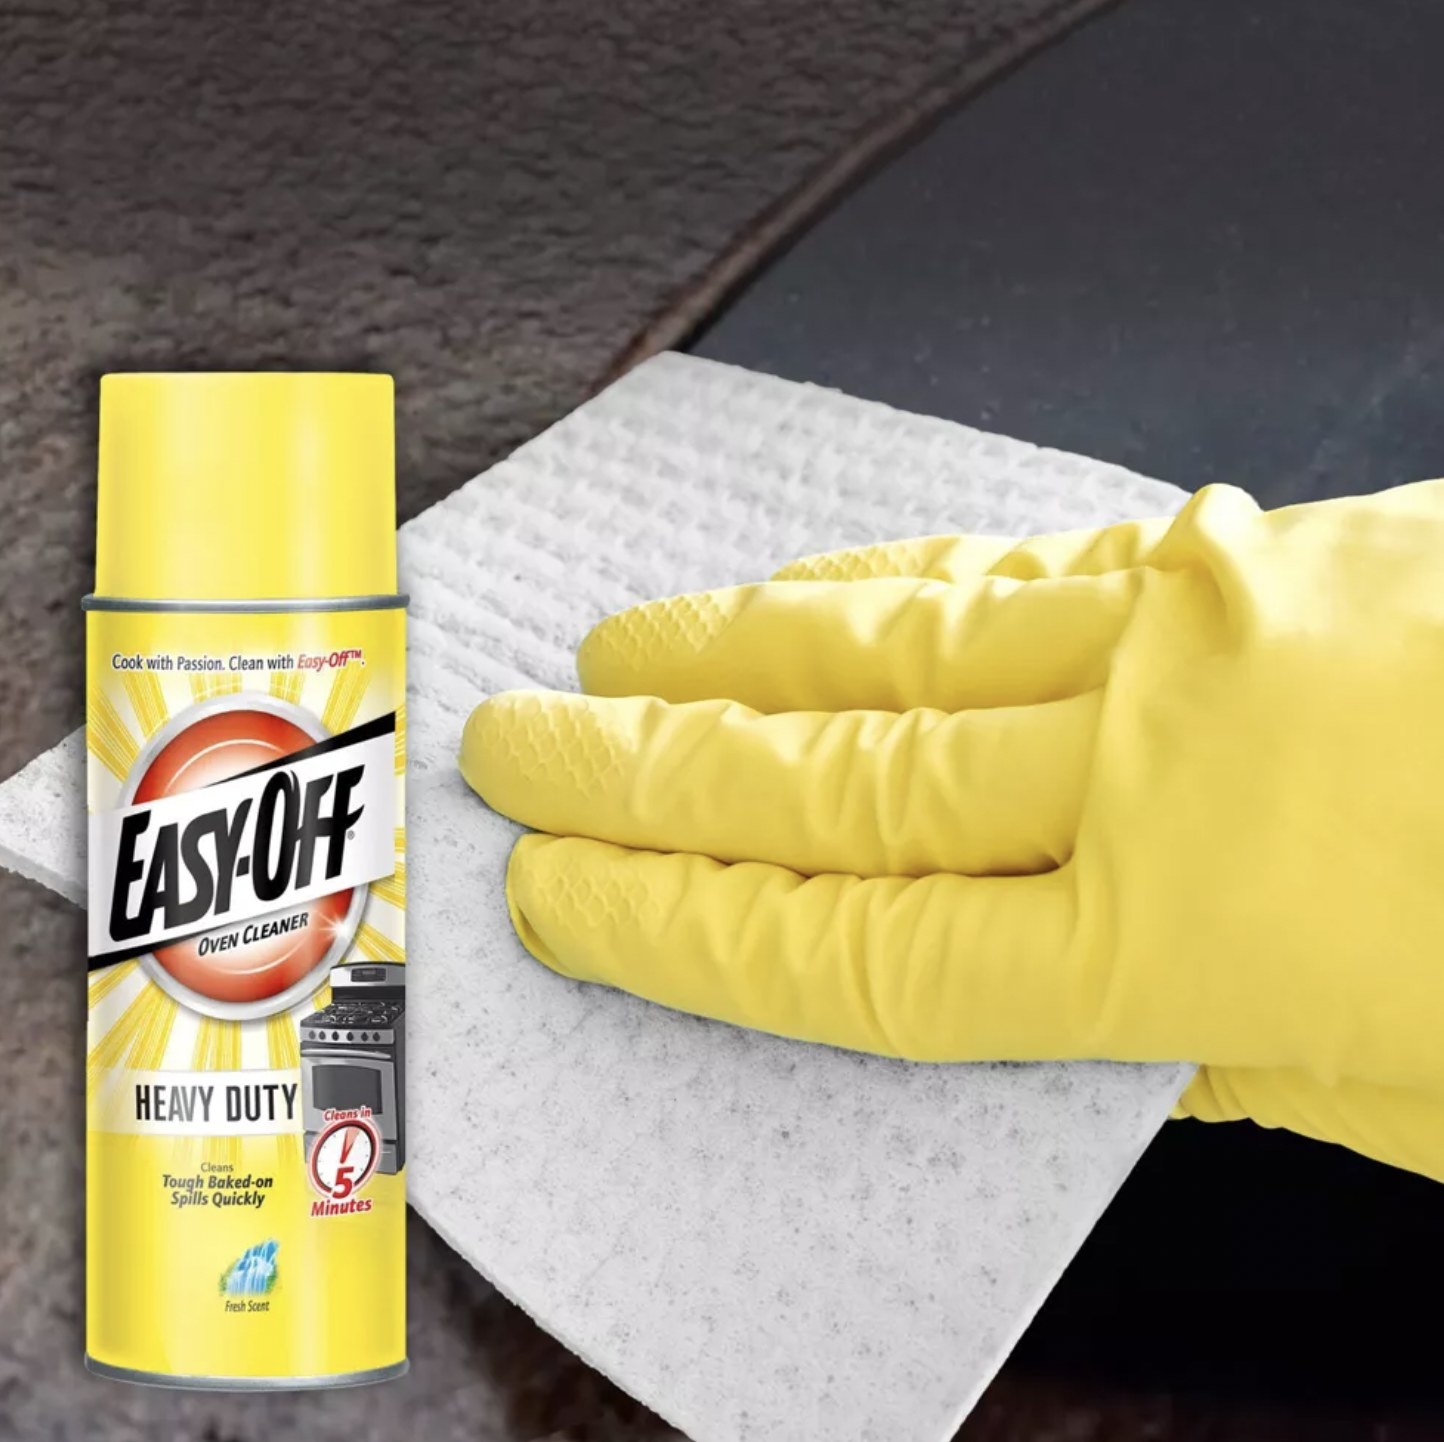 Someone wearing glove and wiping cloth along surface with bottle of Easy-off heavy duty cleaner shown